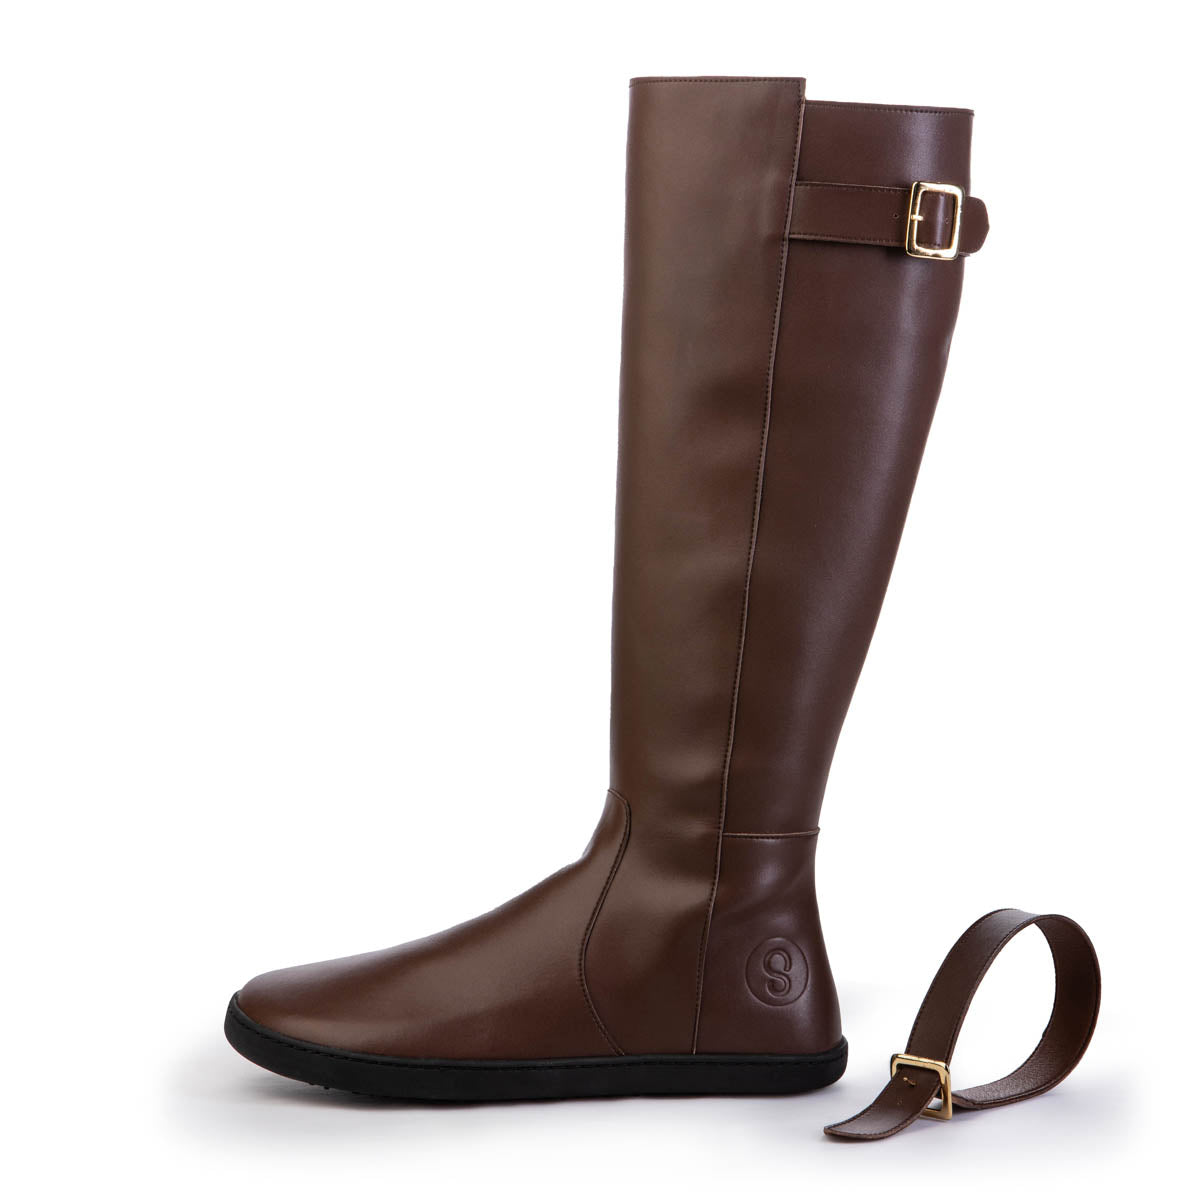 A photo of Shapen Glam lined riding boots made with leather a faux fur lining and rubber soles. The boots are brown in color with gold buckles on the top and around the ankle, the ankle buckle strap is removable. One boot is shown from the left side with the ankle buckle strap removed against a white background. color_brown